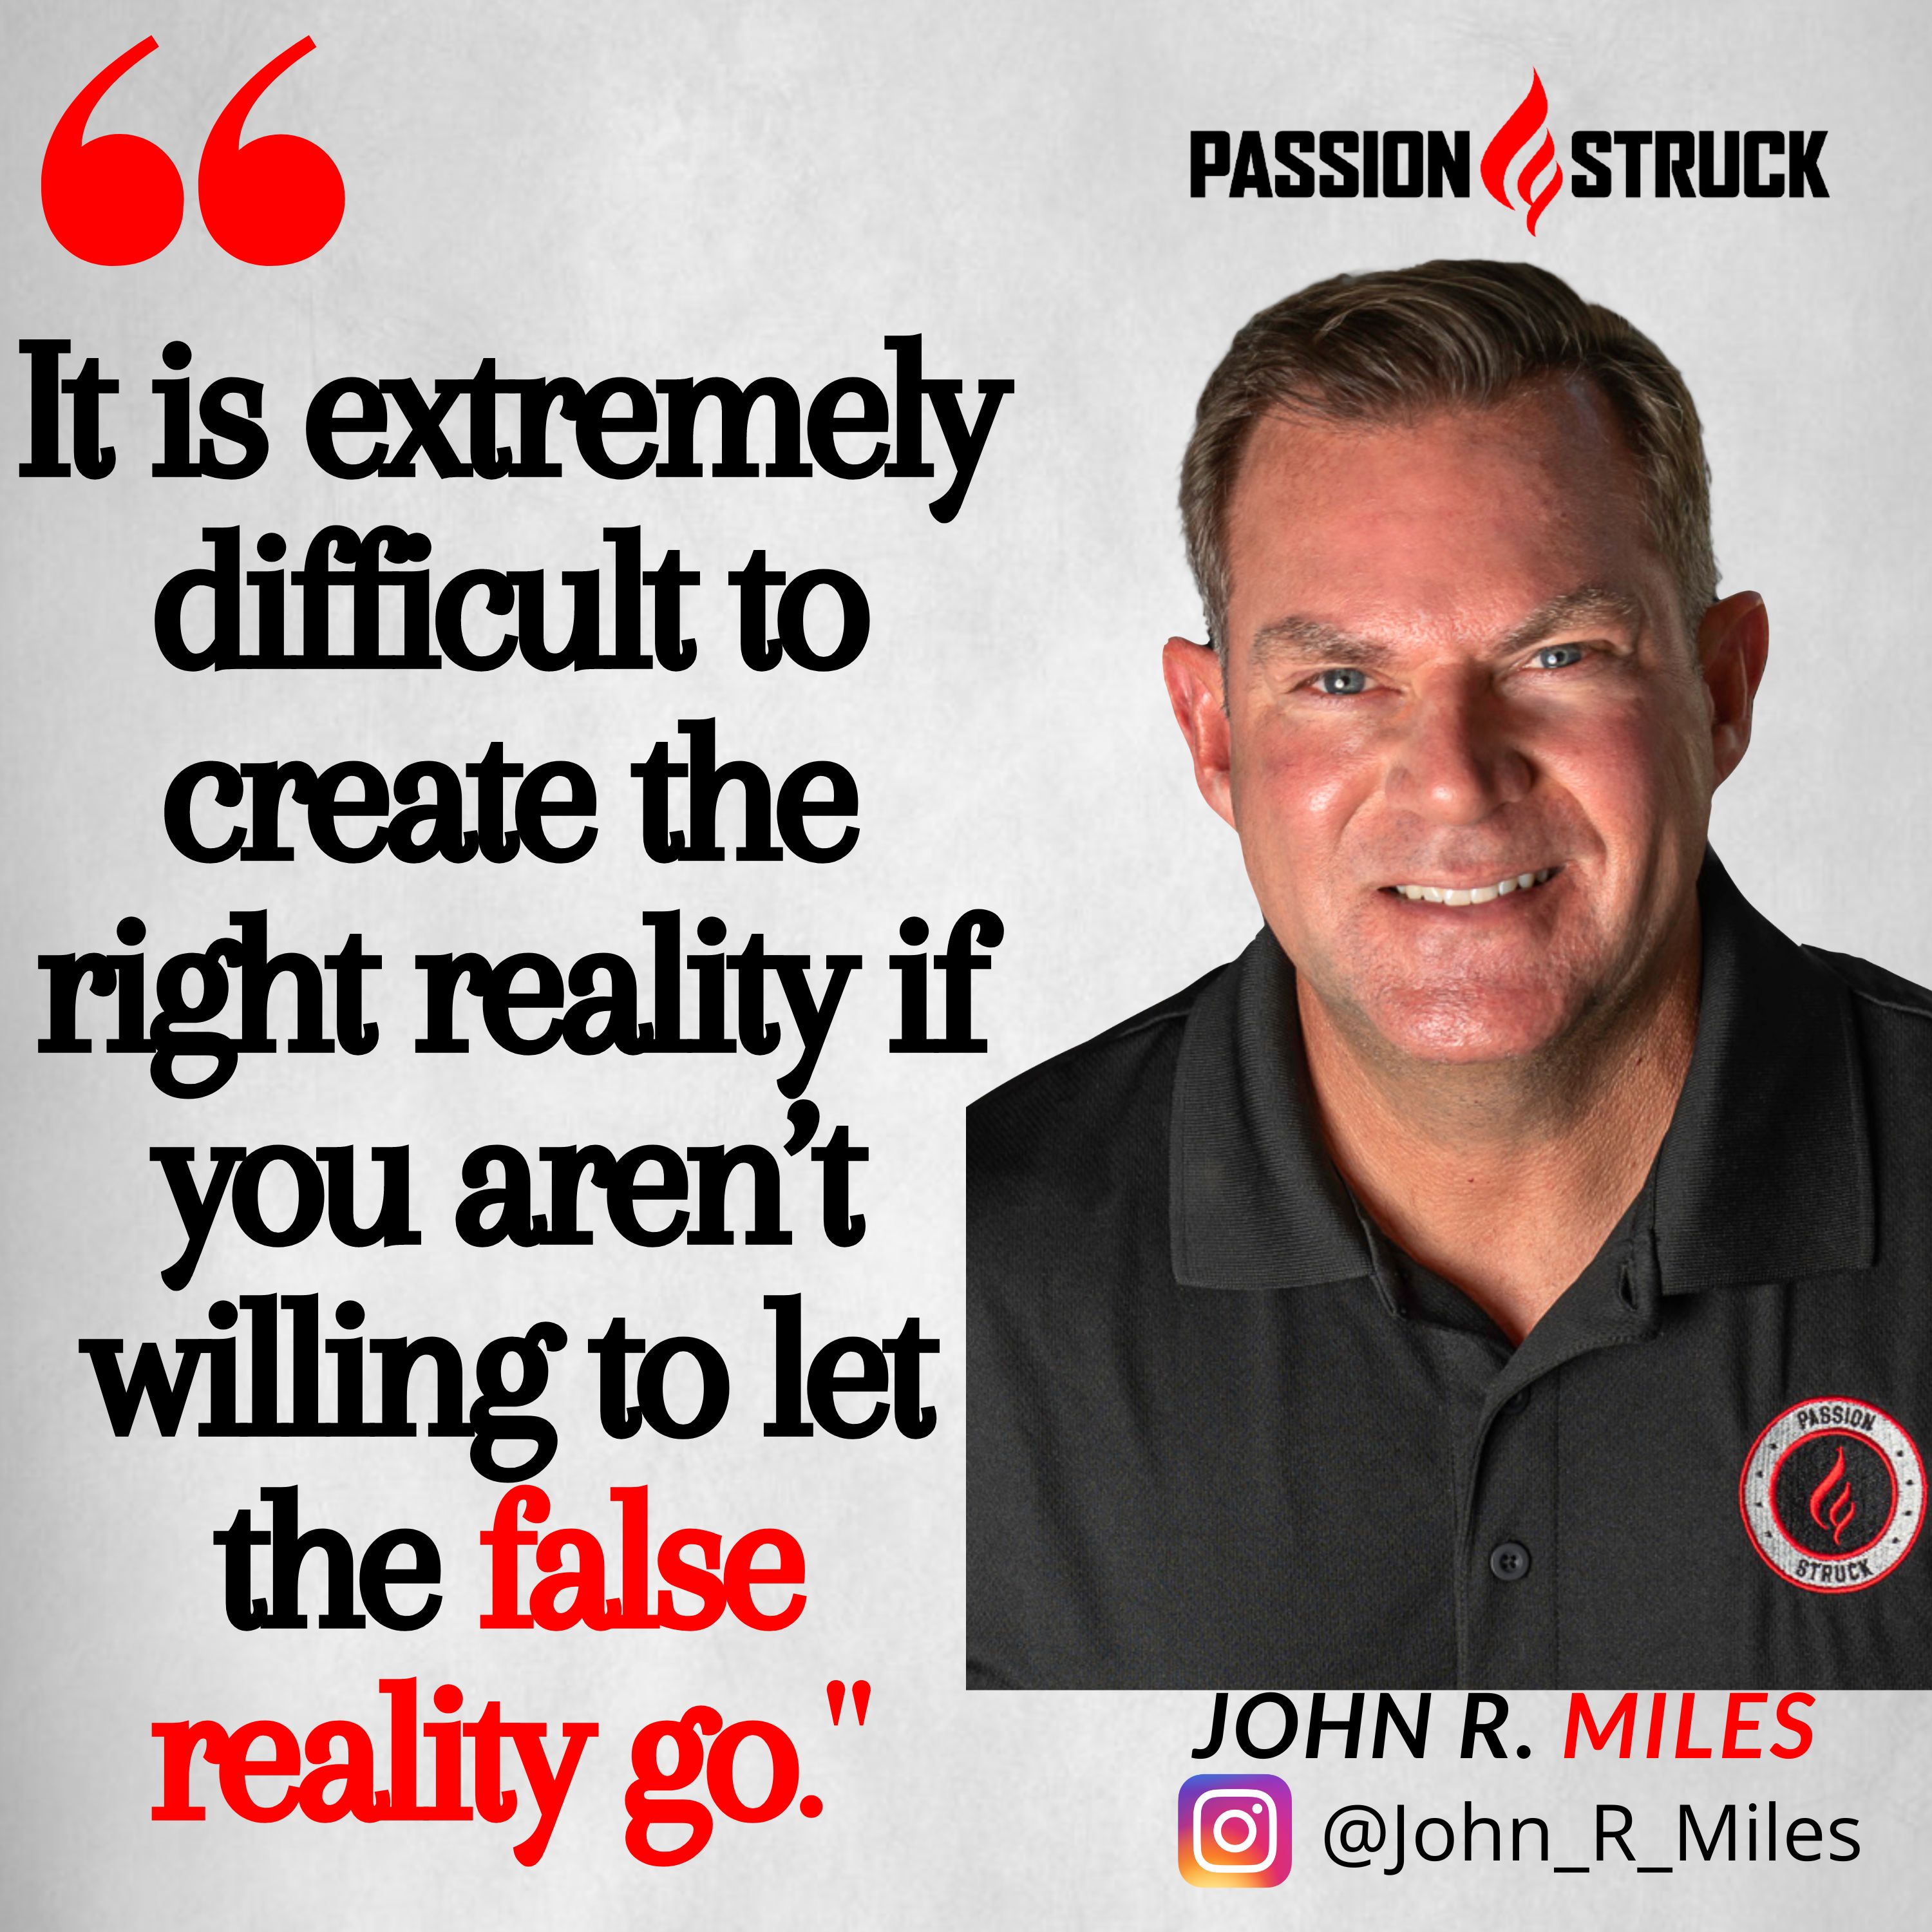 John R. Miles quote on self-acceptance and creating the right reality